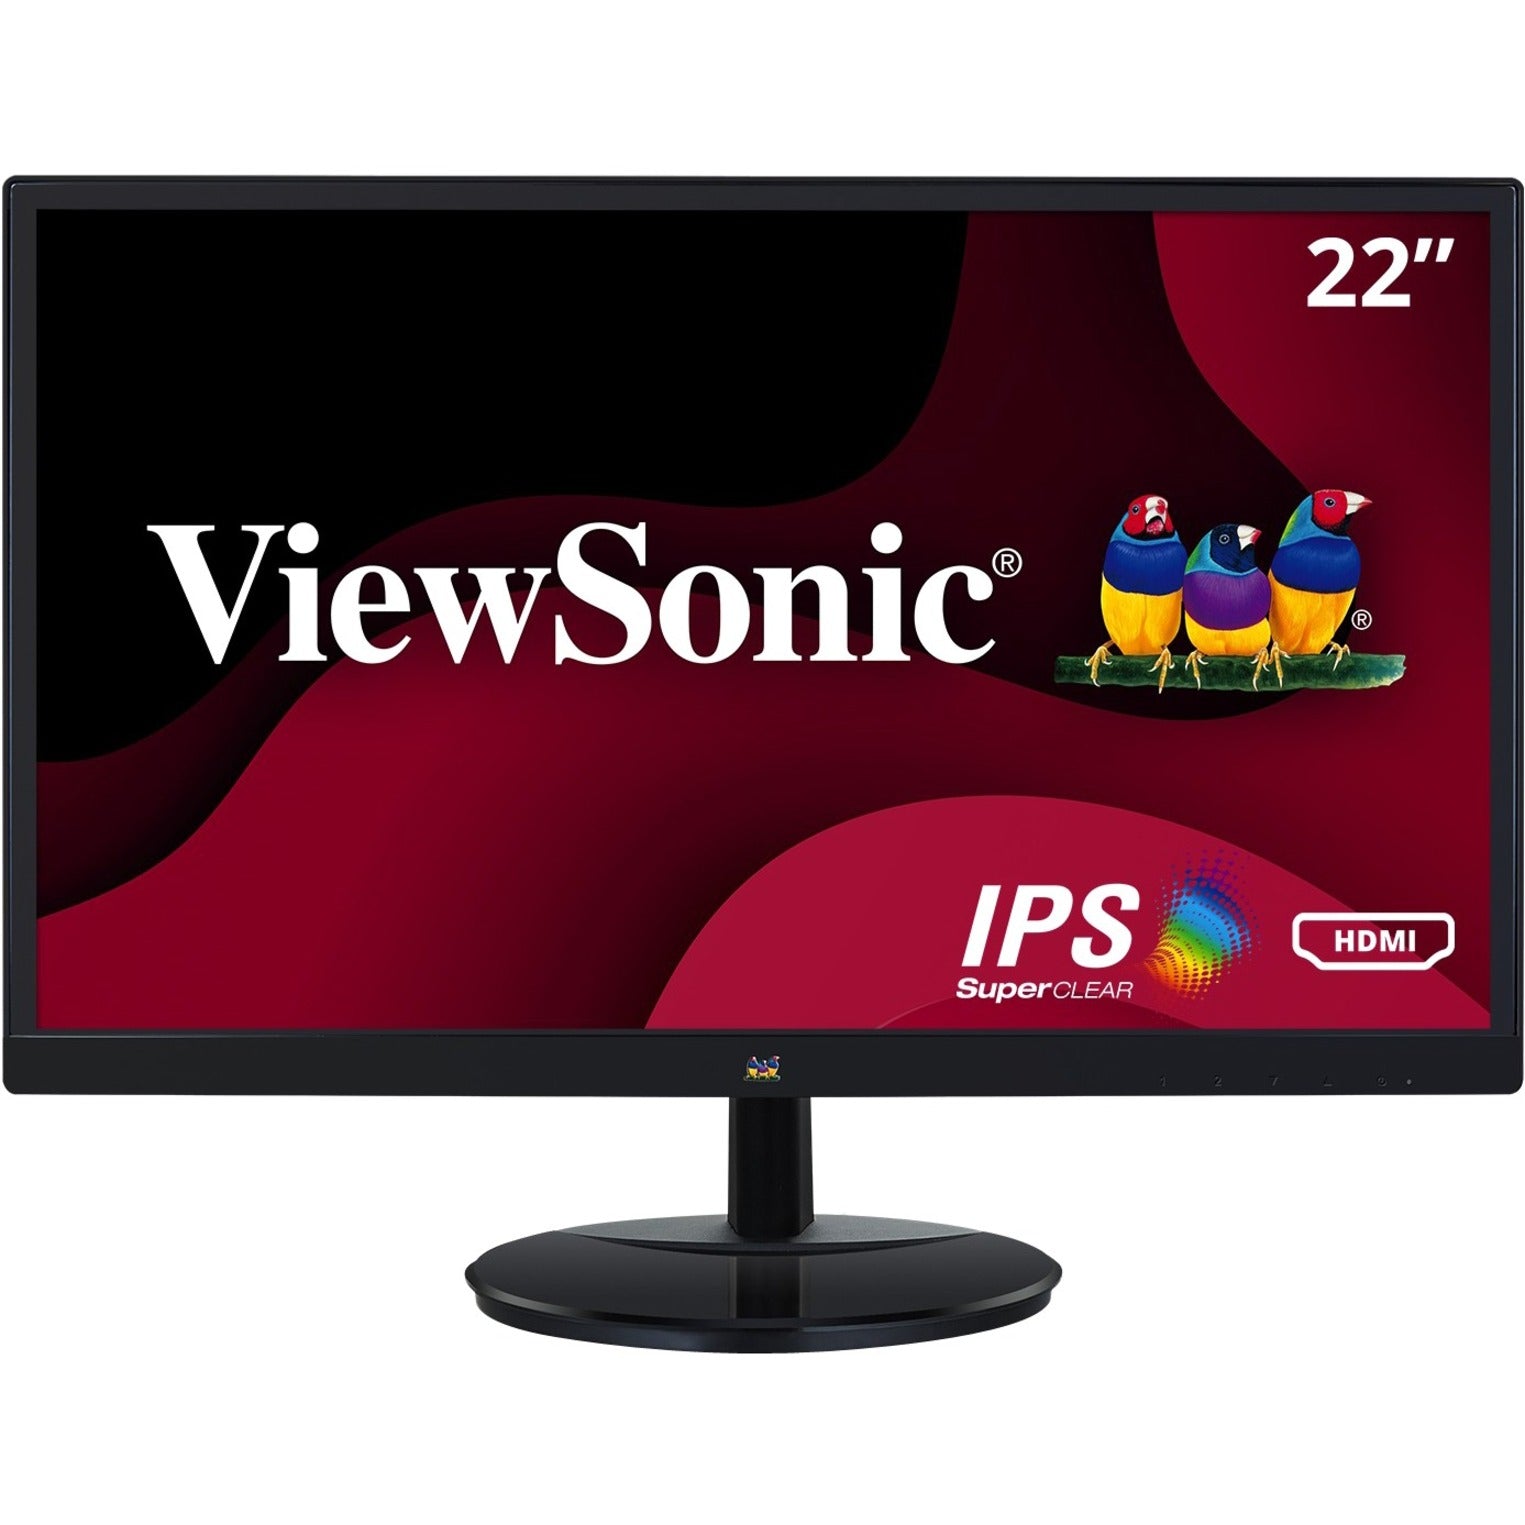 ViewSonic 22 Full HD SuperClear IPS LED Monitor [Discontinued]